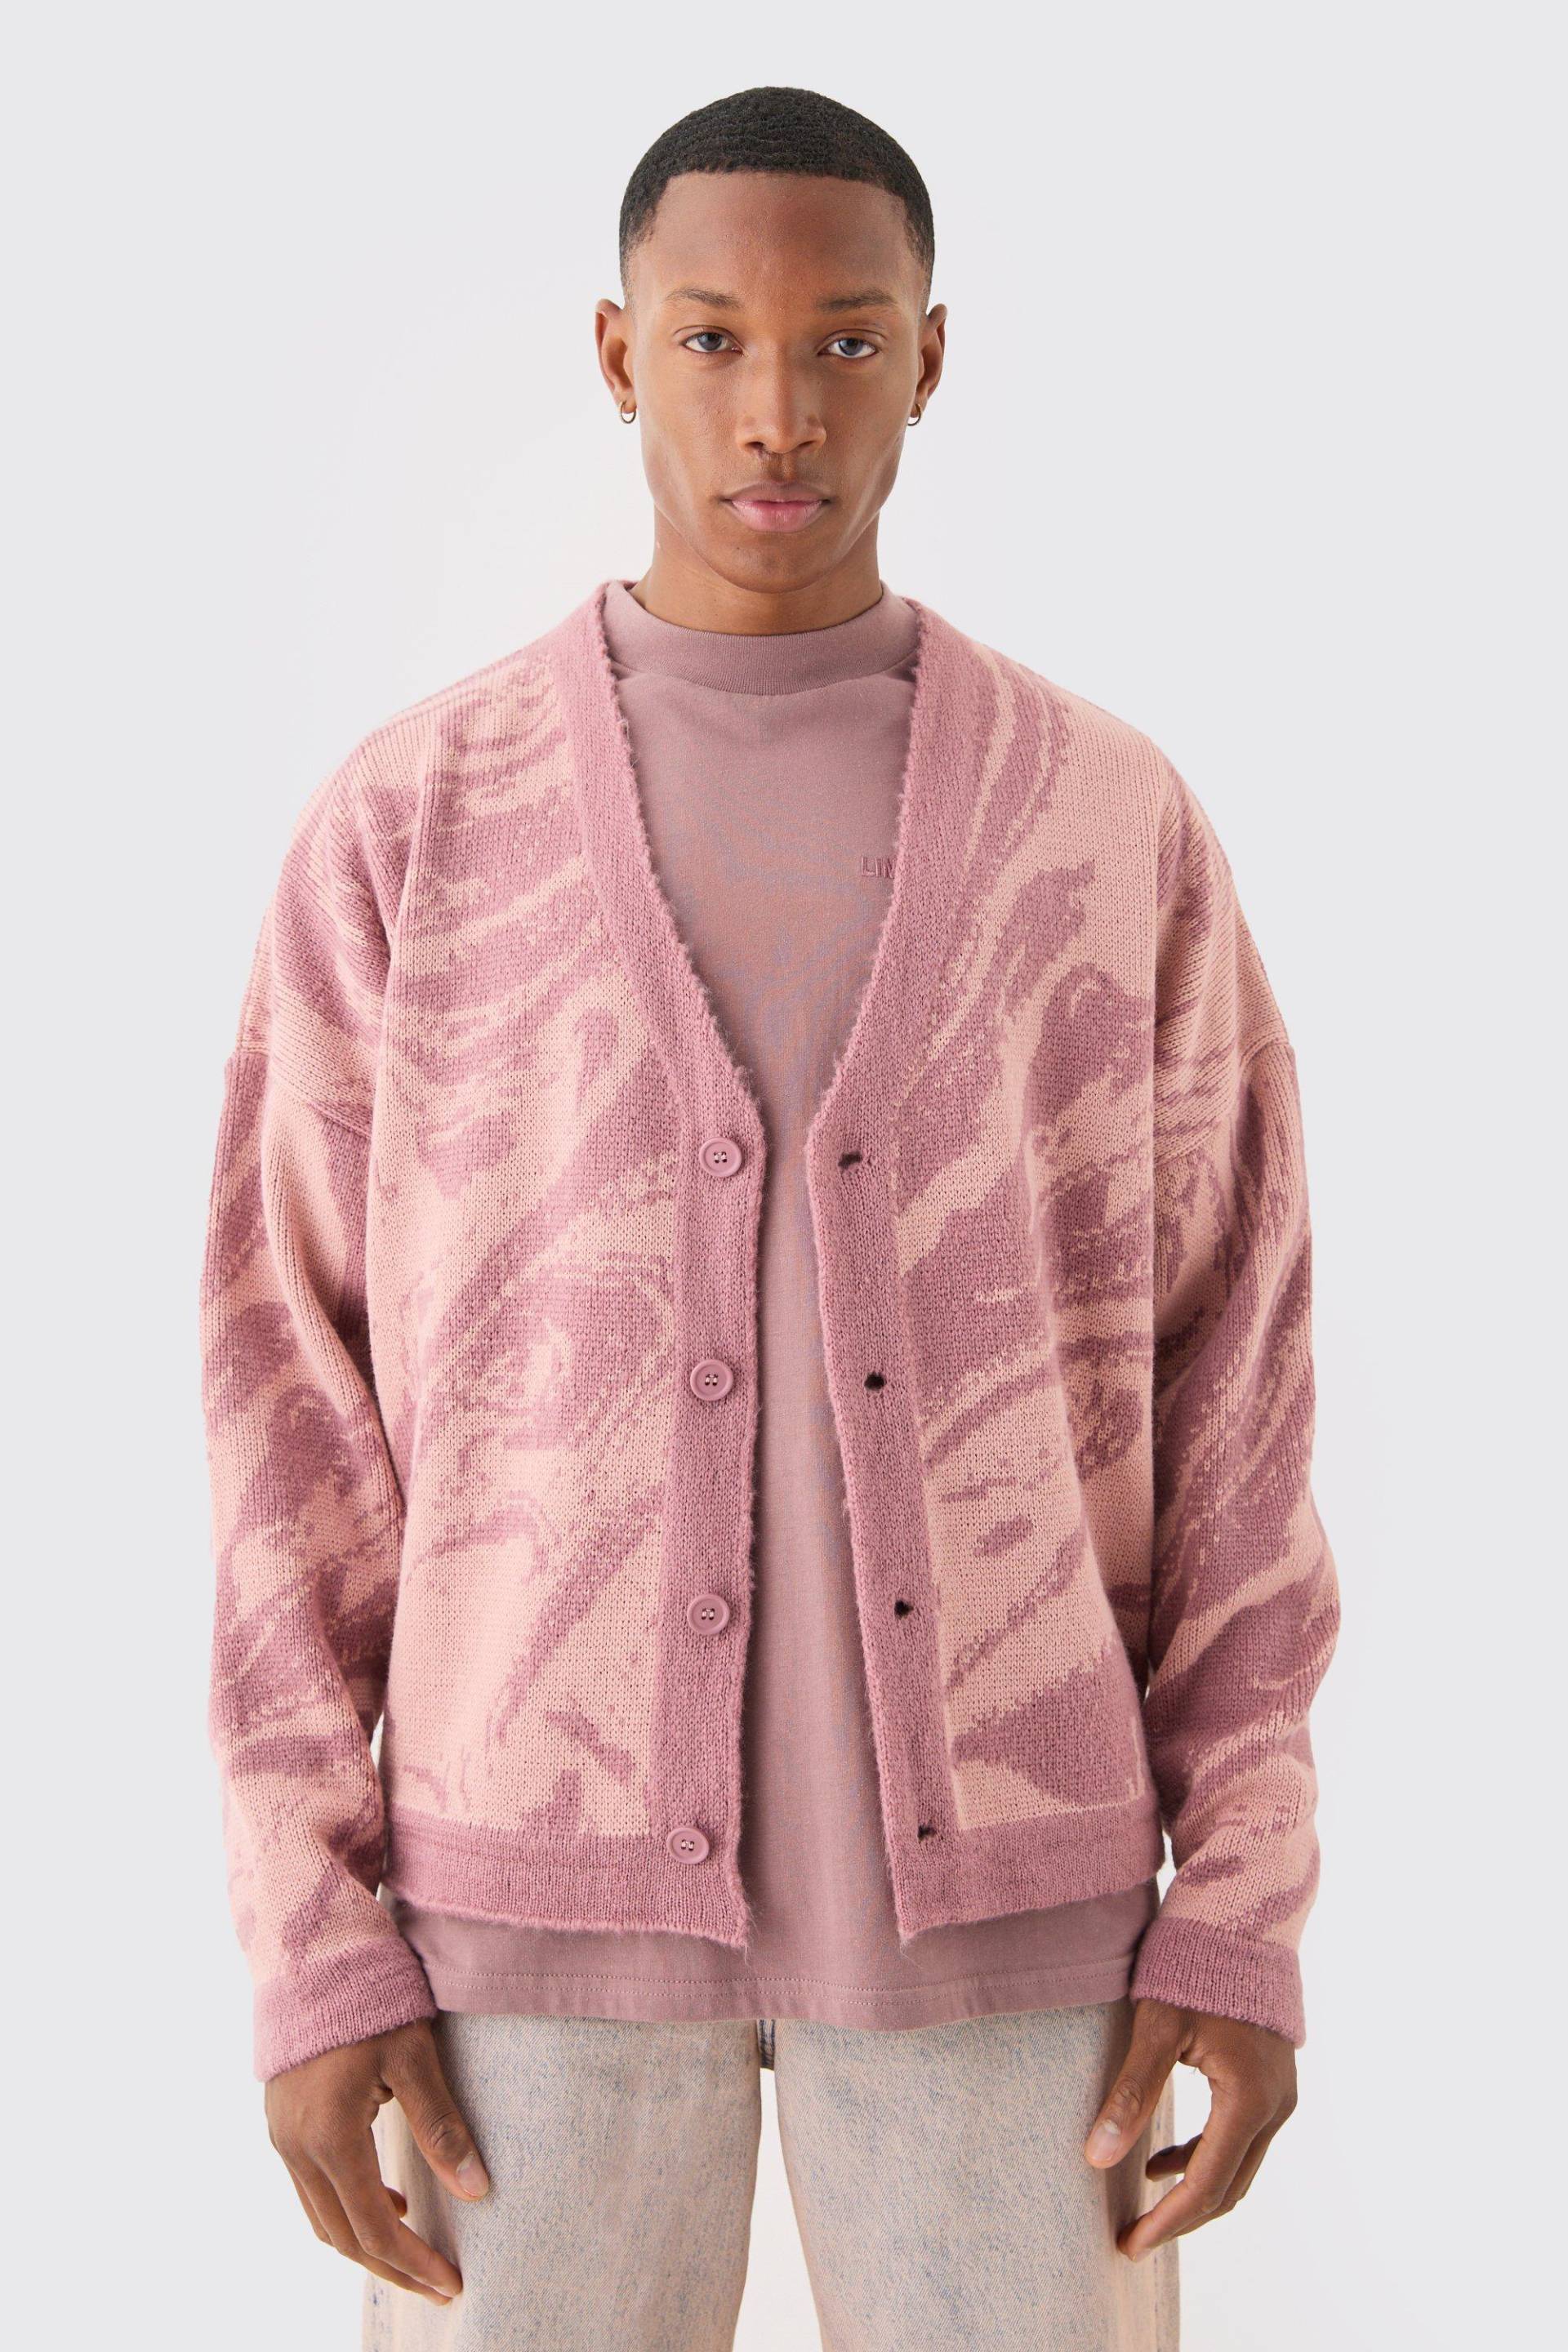 Mens Boxy Oversized Brushed Abstract All Over Jacquard Cardigan - Rosa - M, Rosa von boohooman